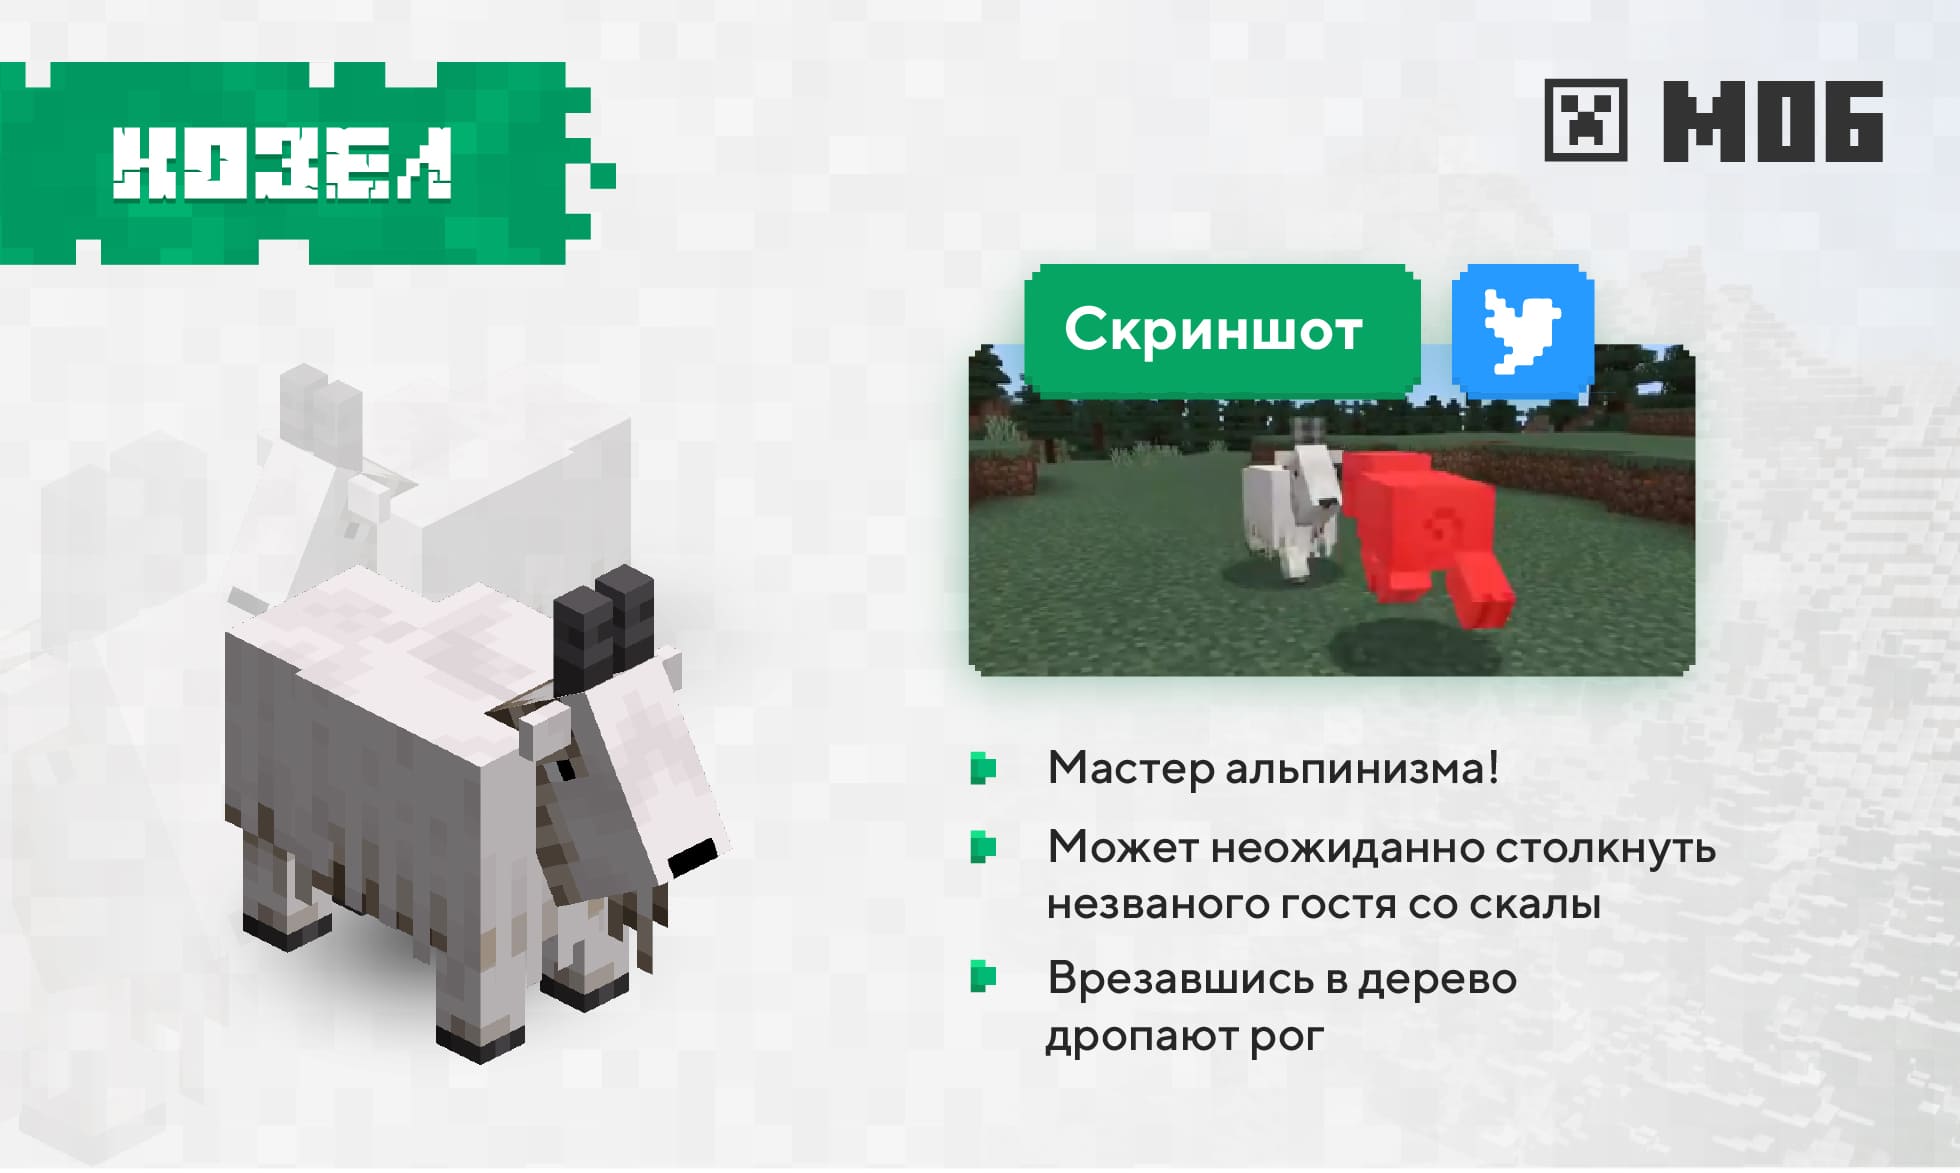 A new mob, Goat, has been added to the game.  She can butt and jump.